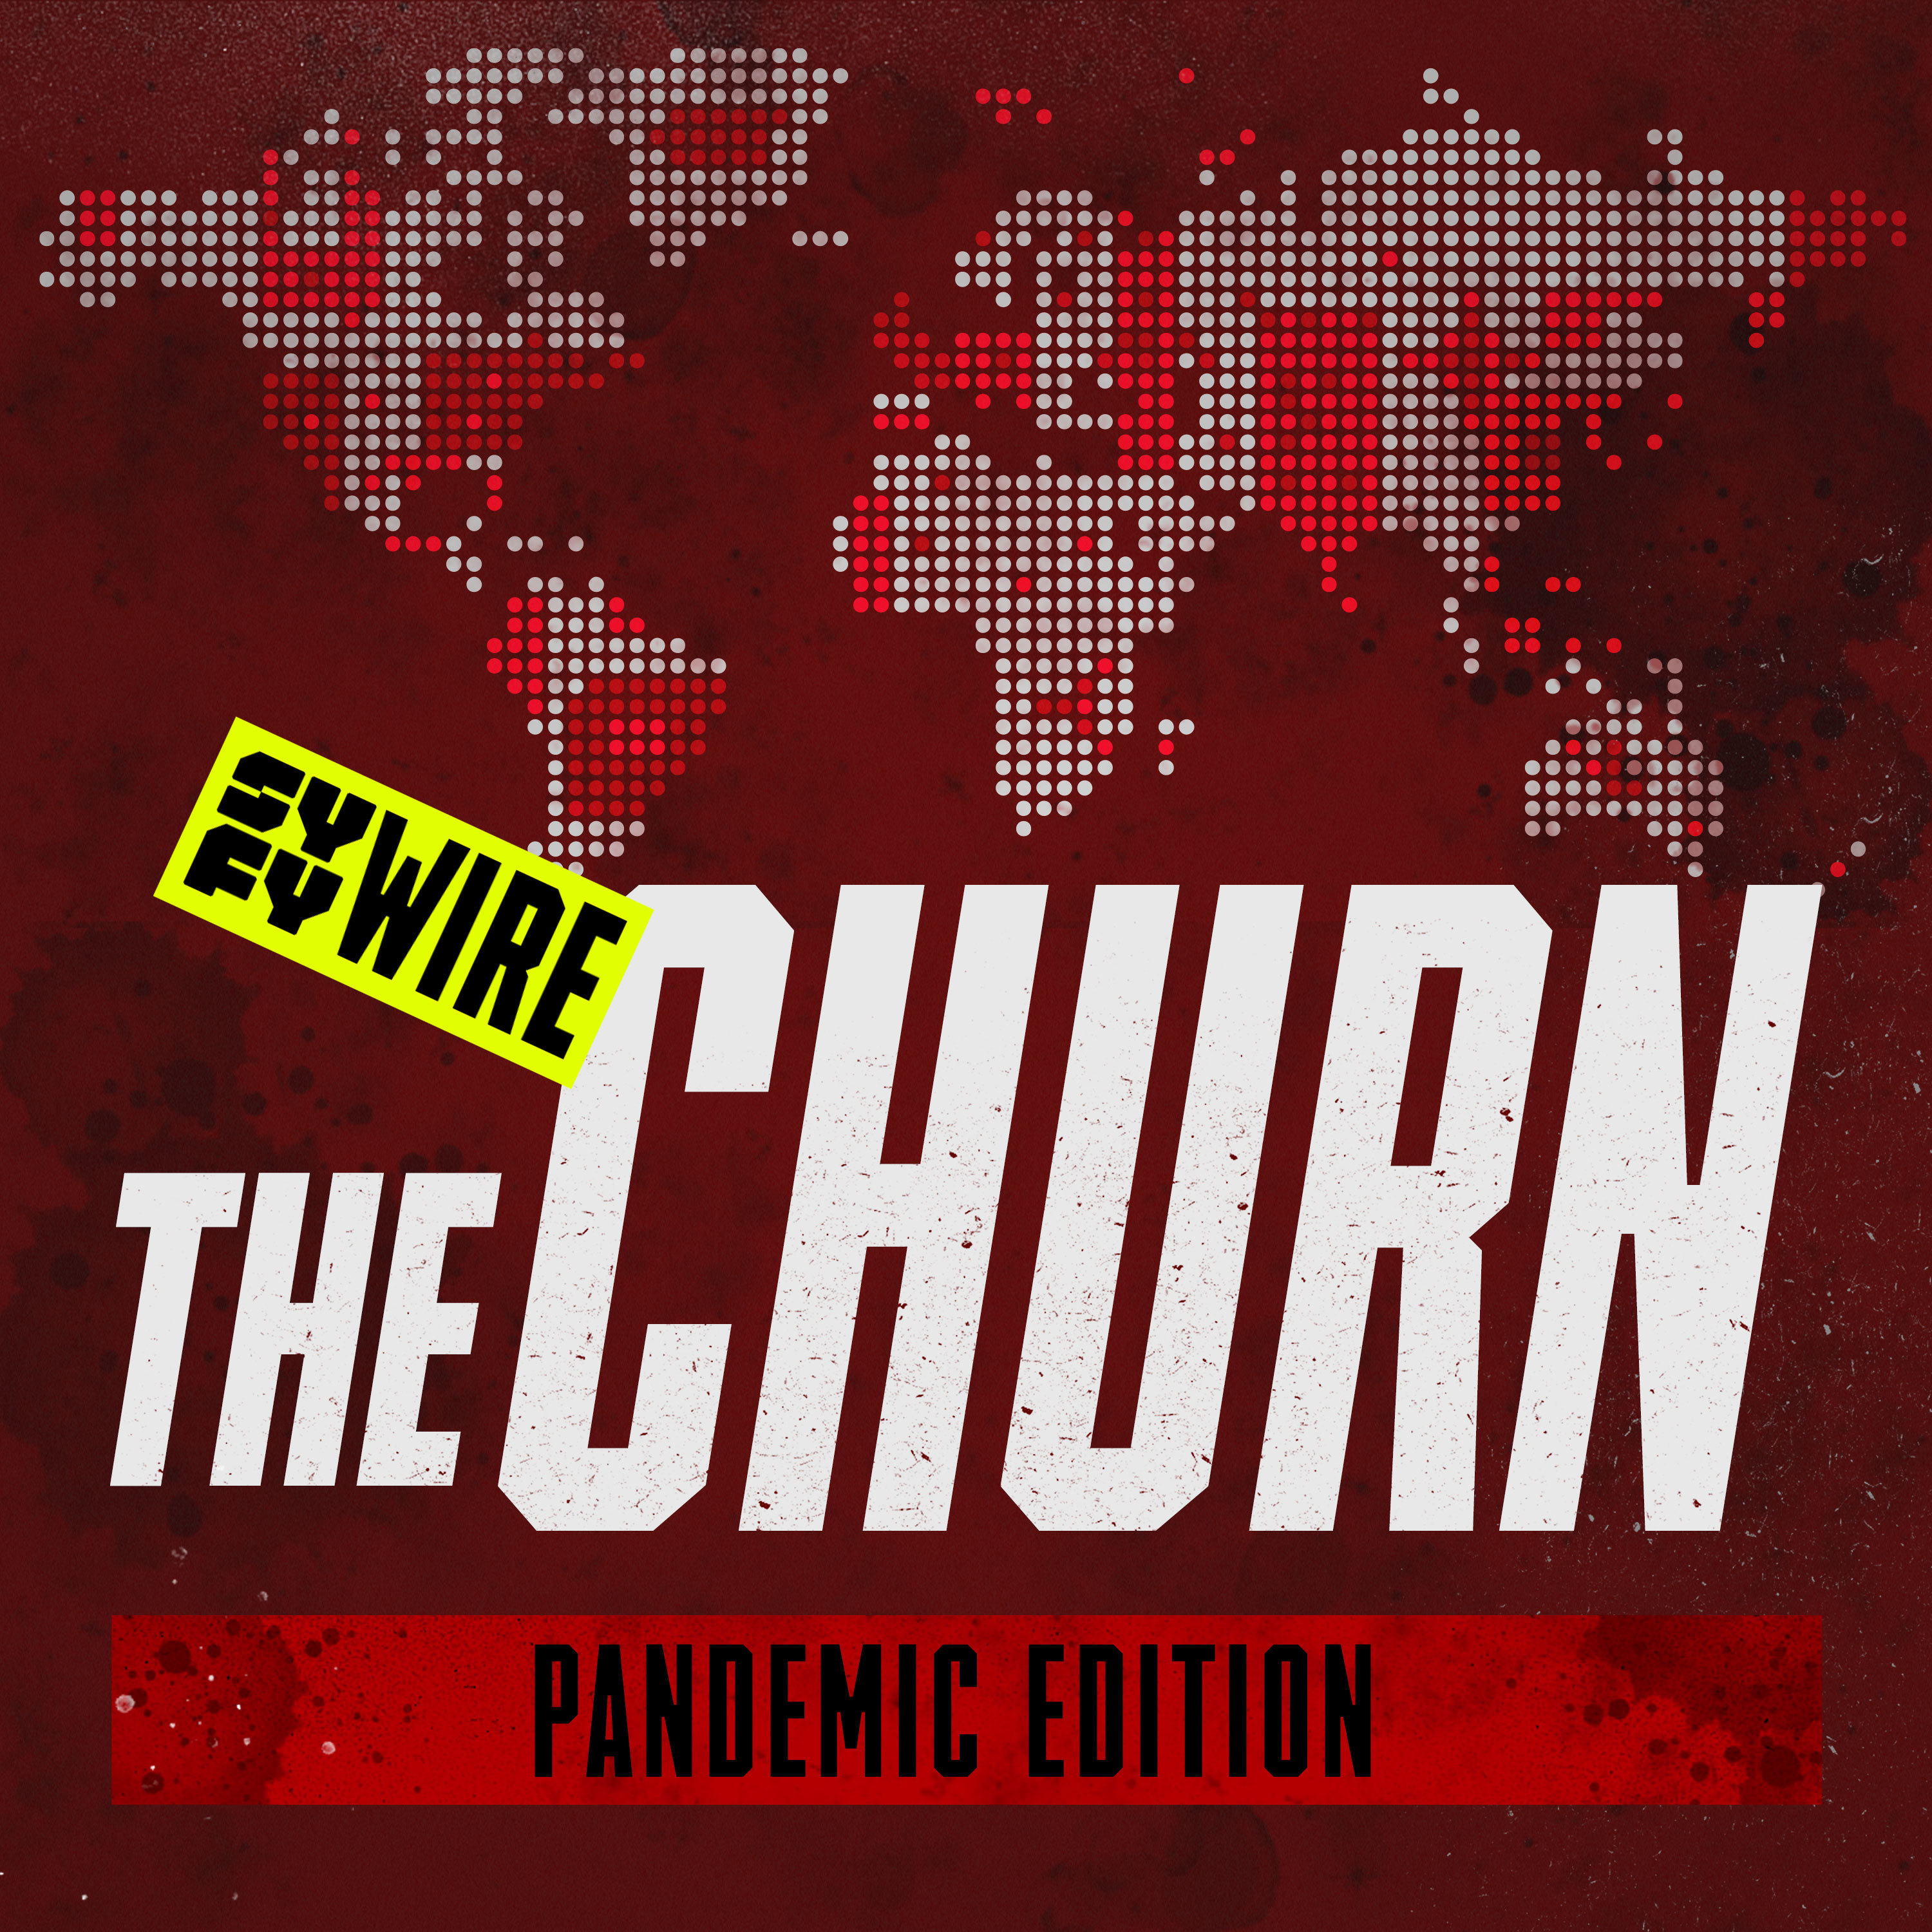 The Churn is Returning: Pandemic Edition